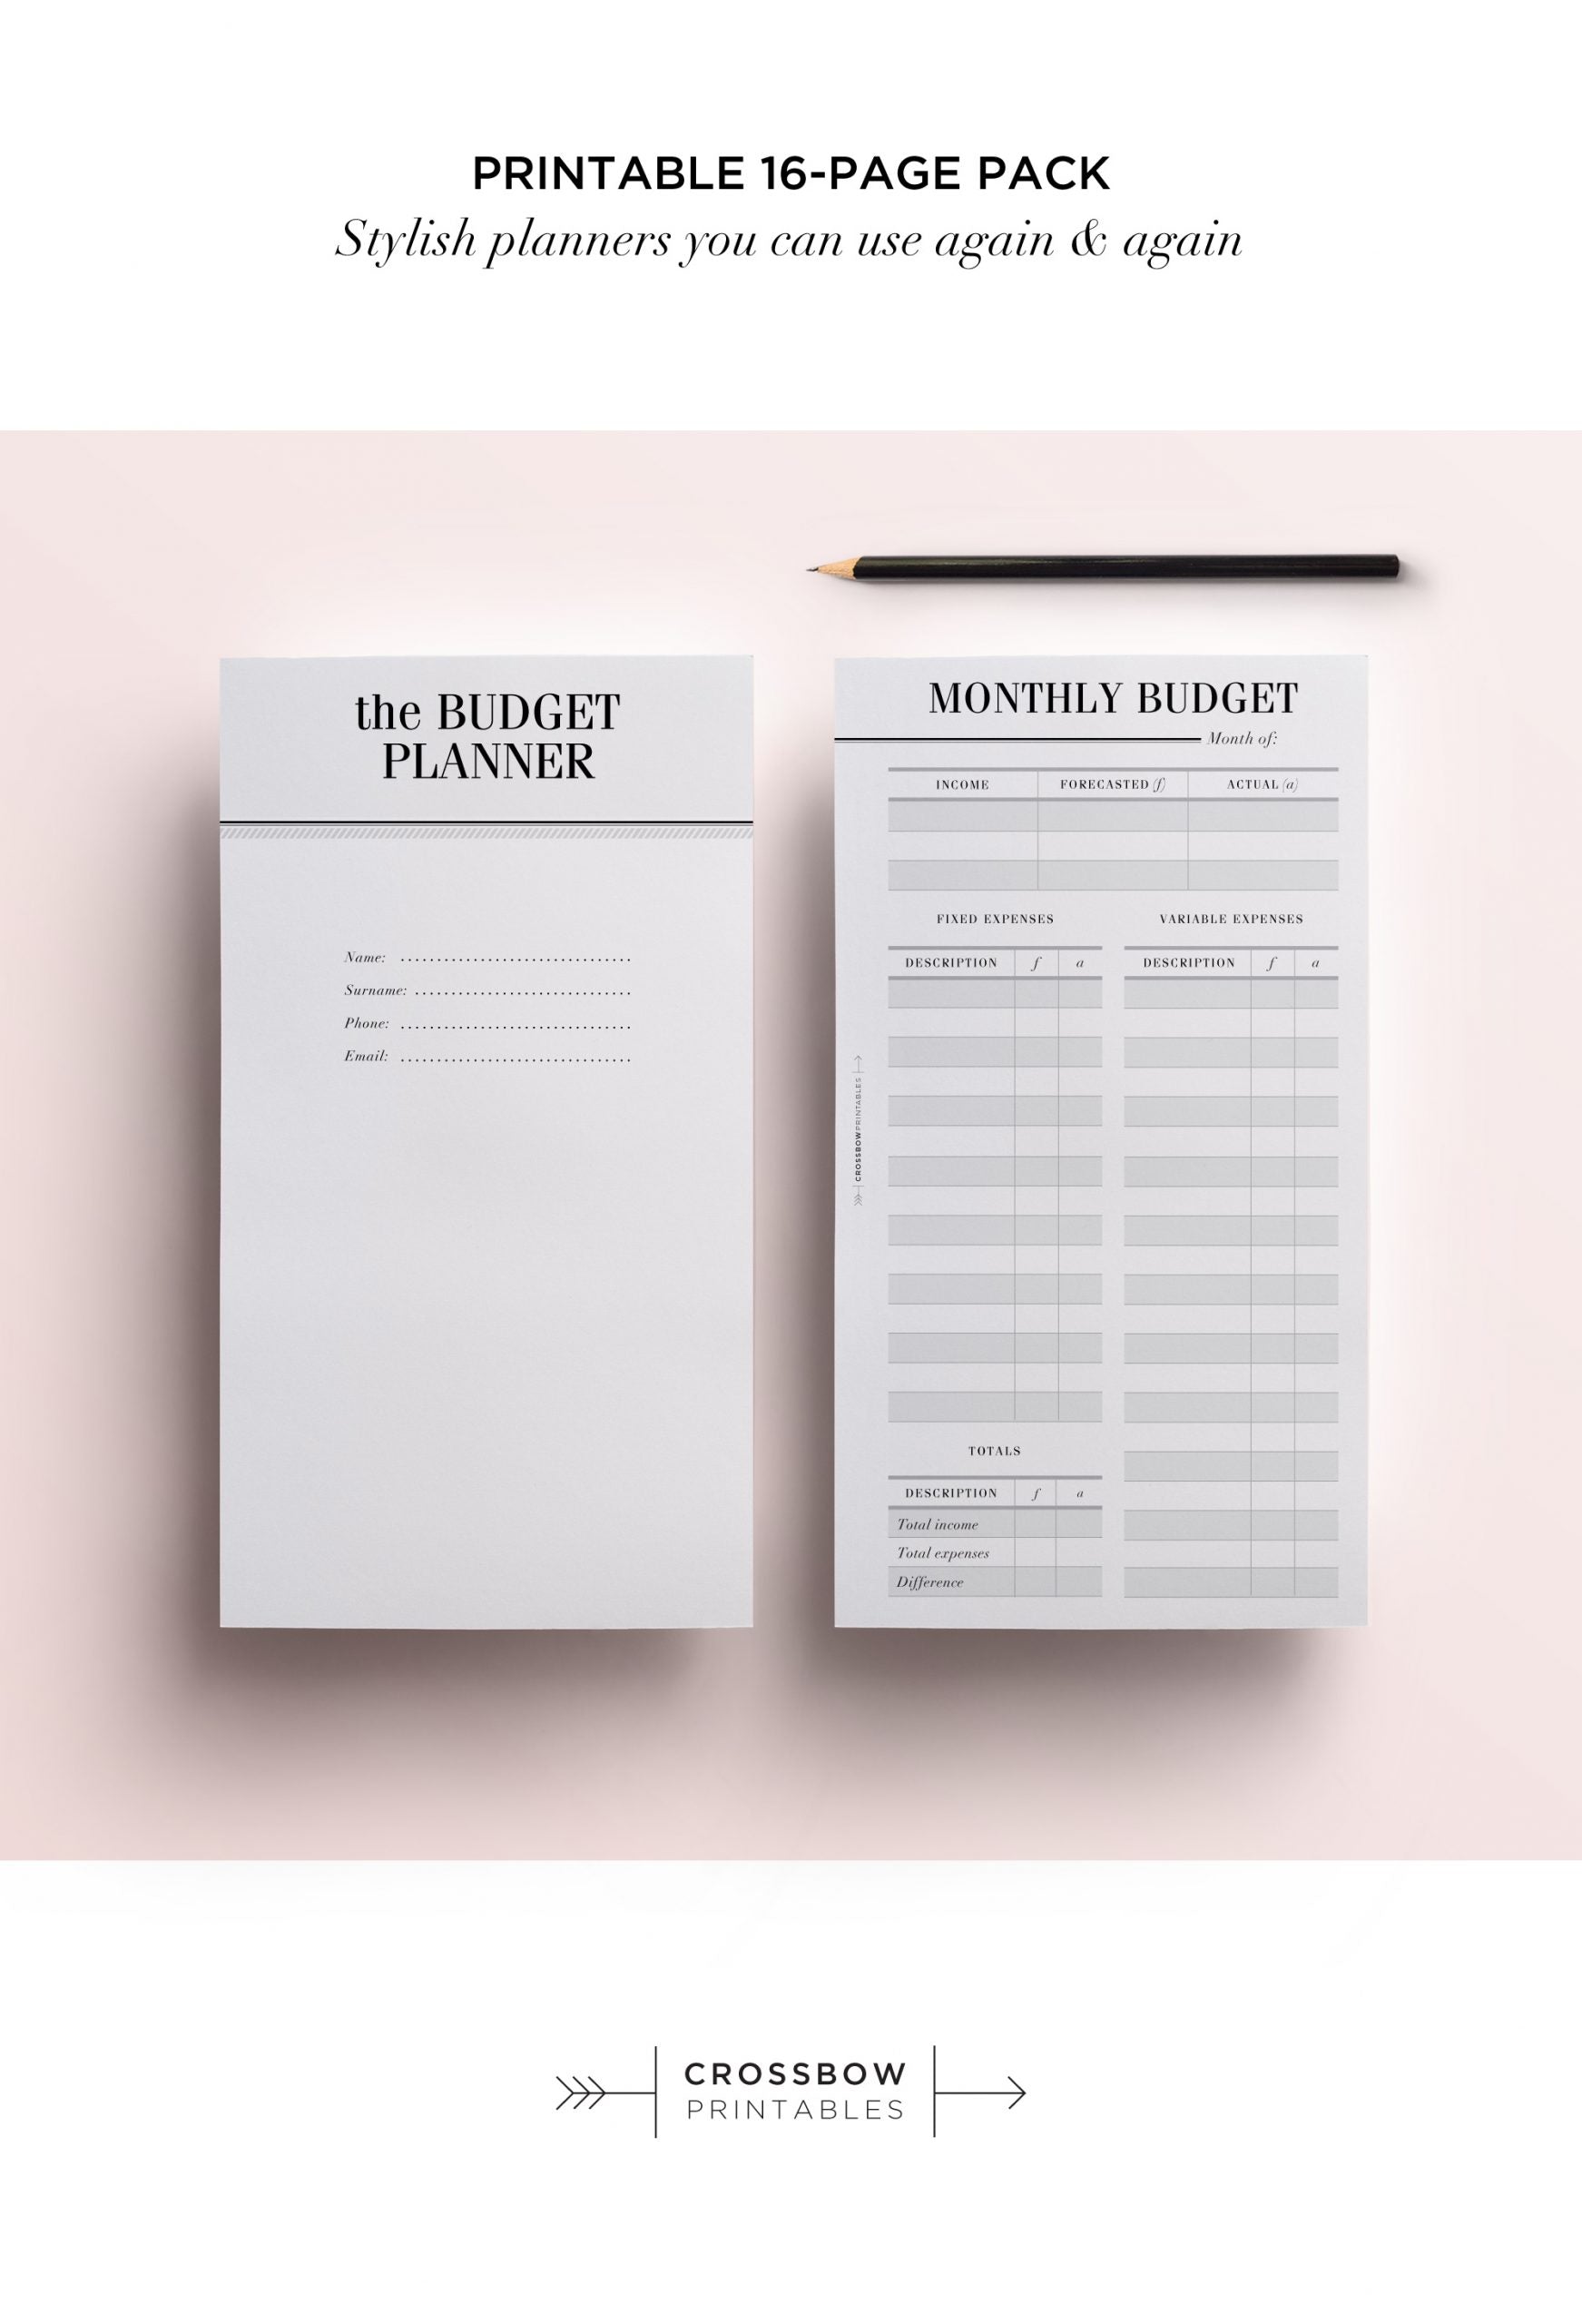 Printable Personal Budget Planner